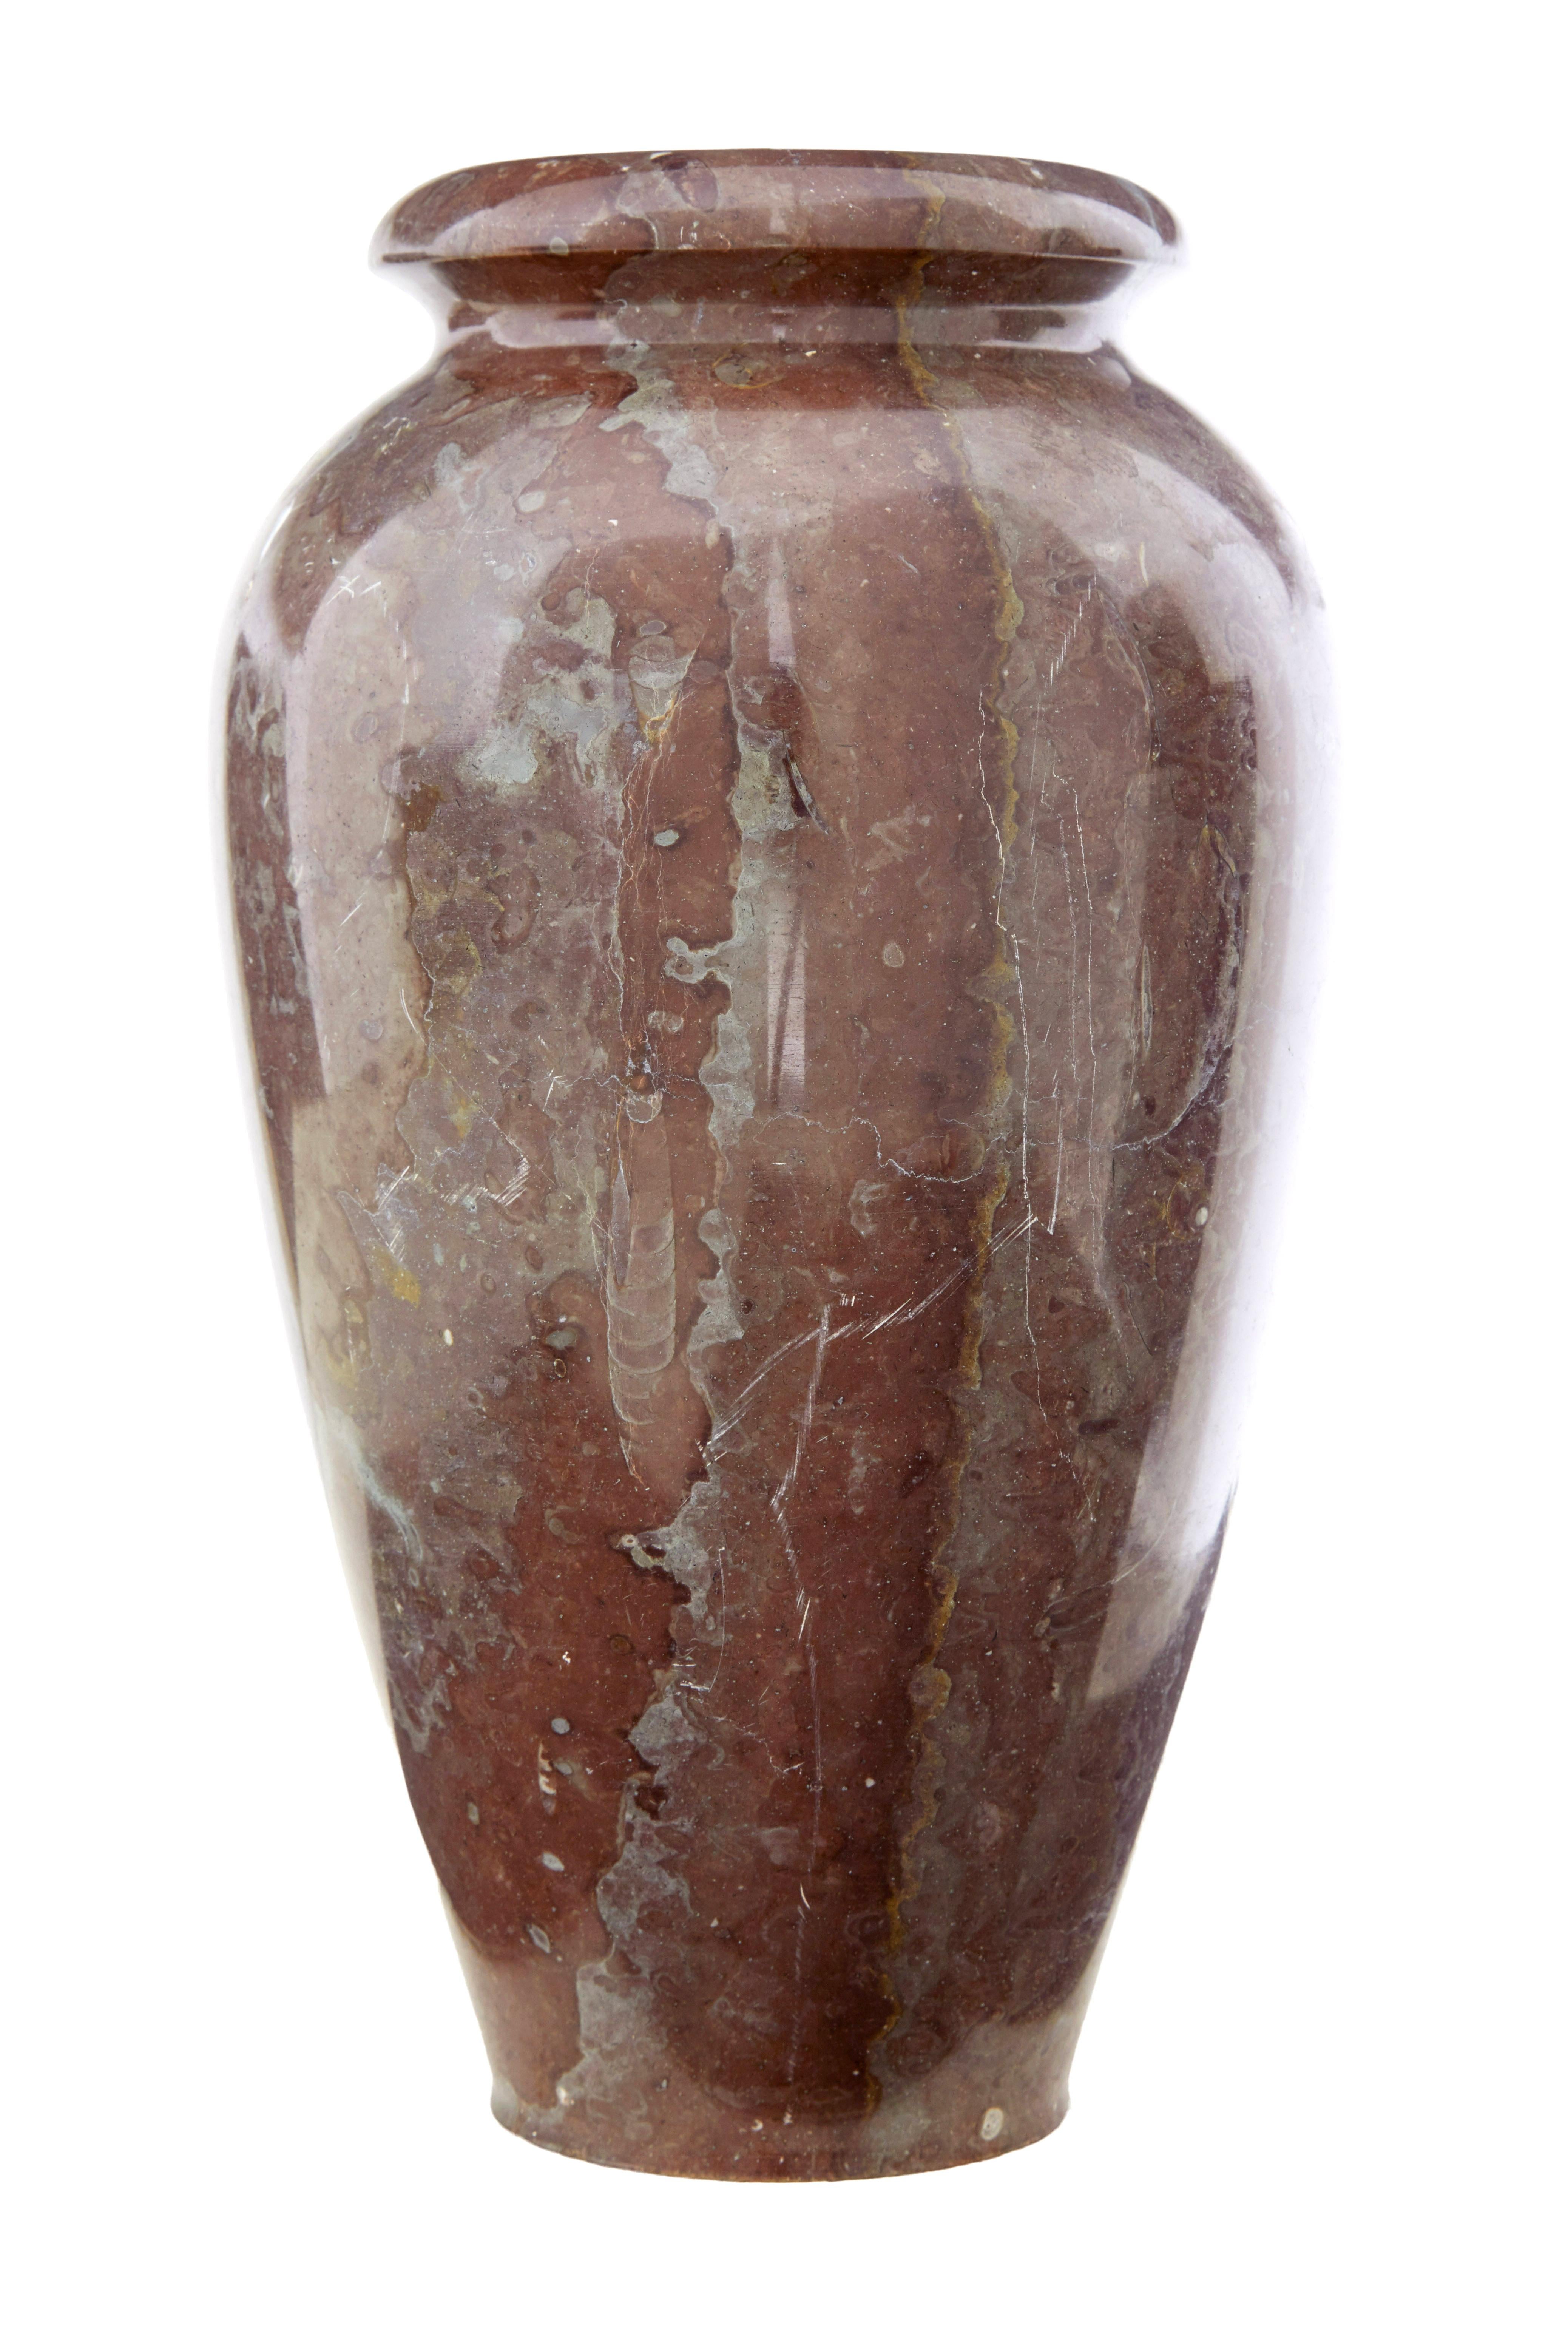 Early 20th century marble vase circa 1920.

Elegant shaped vase in deep reds and greys. Roll top rim.  Ideal for use in multiple rooms around the home, heavy item for size.

Small chips to base.